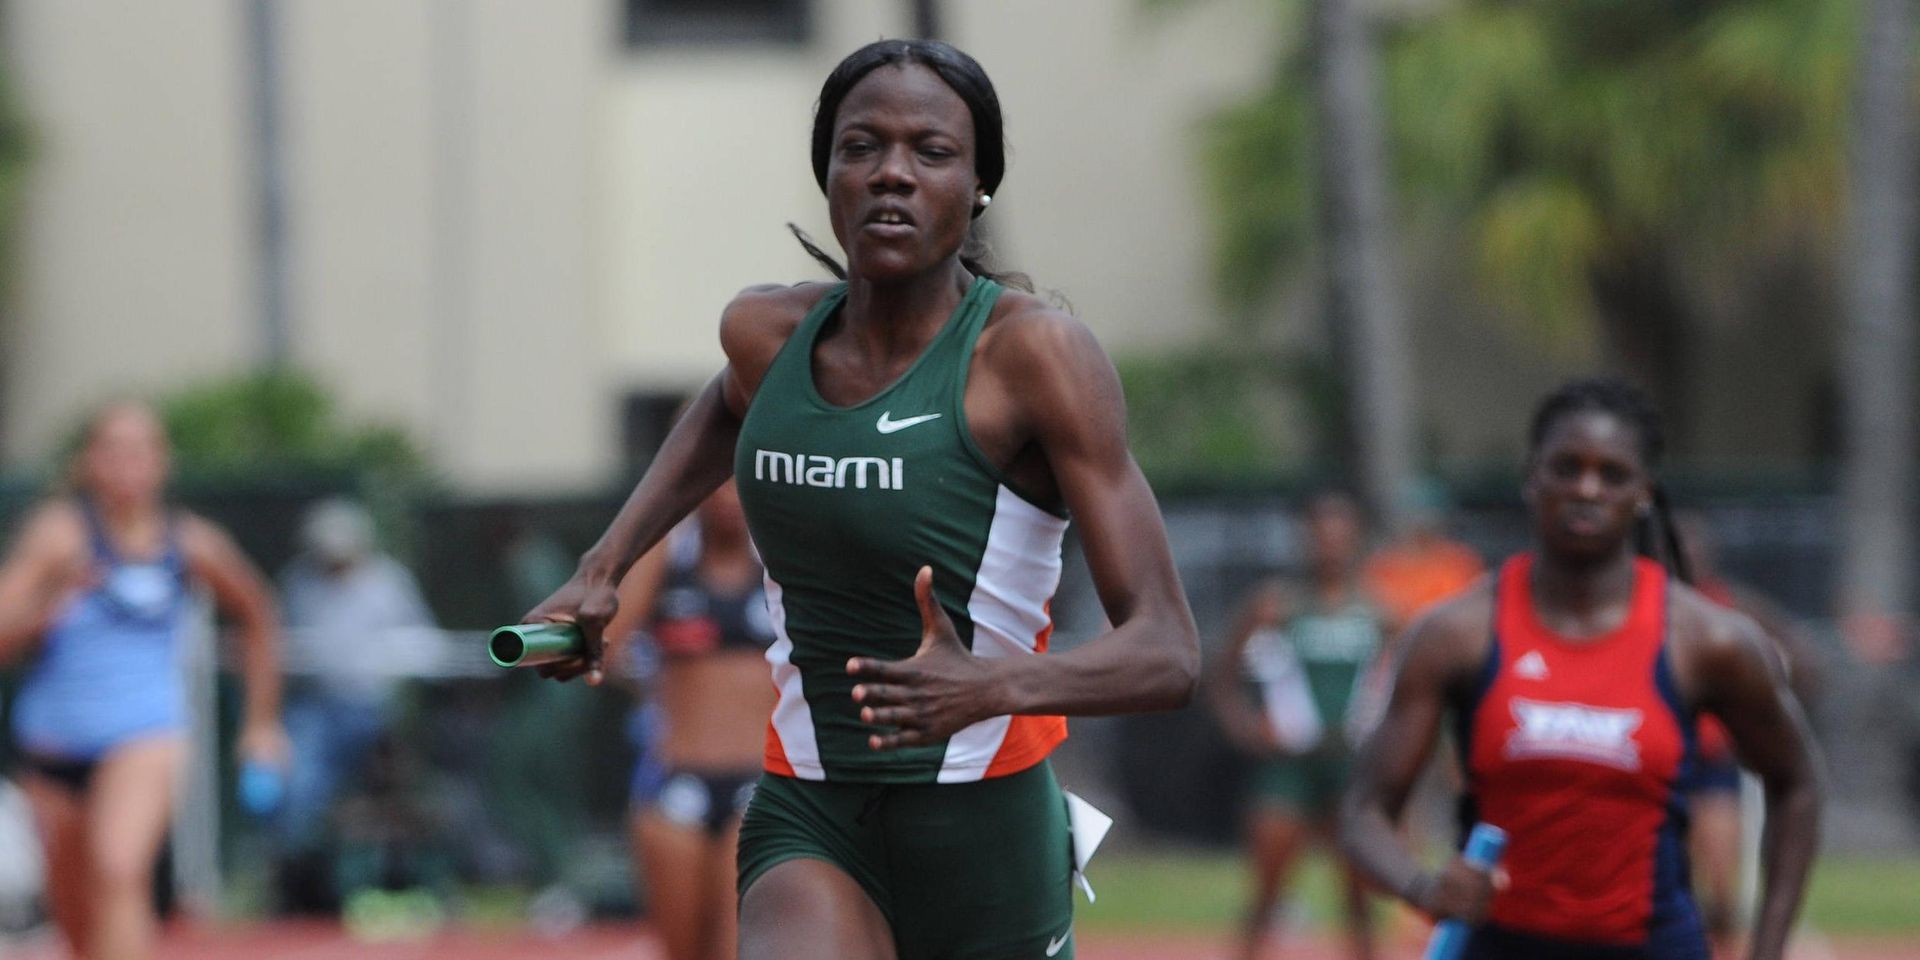 @MiamiTrack Sprints Past ACC Competition